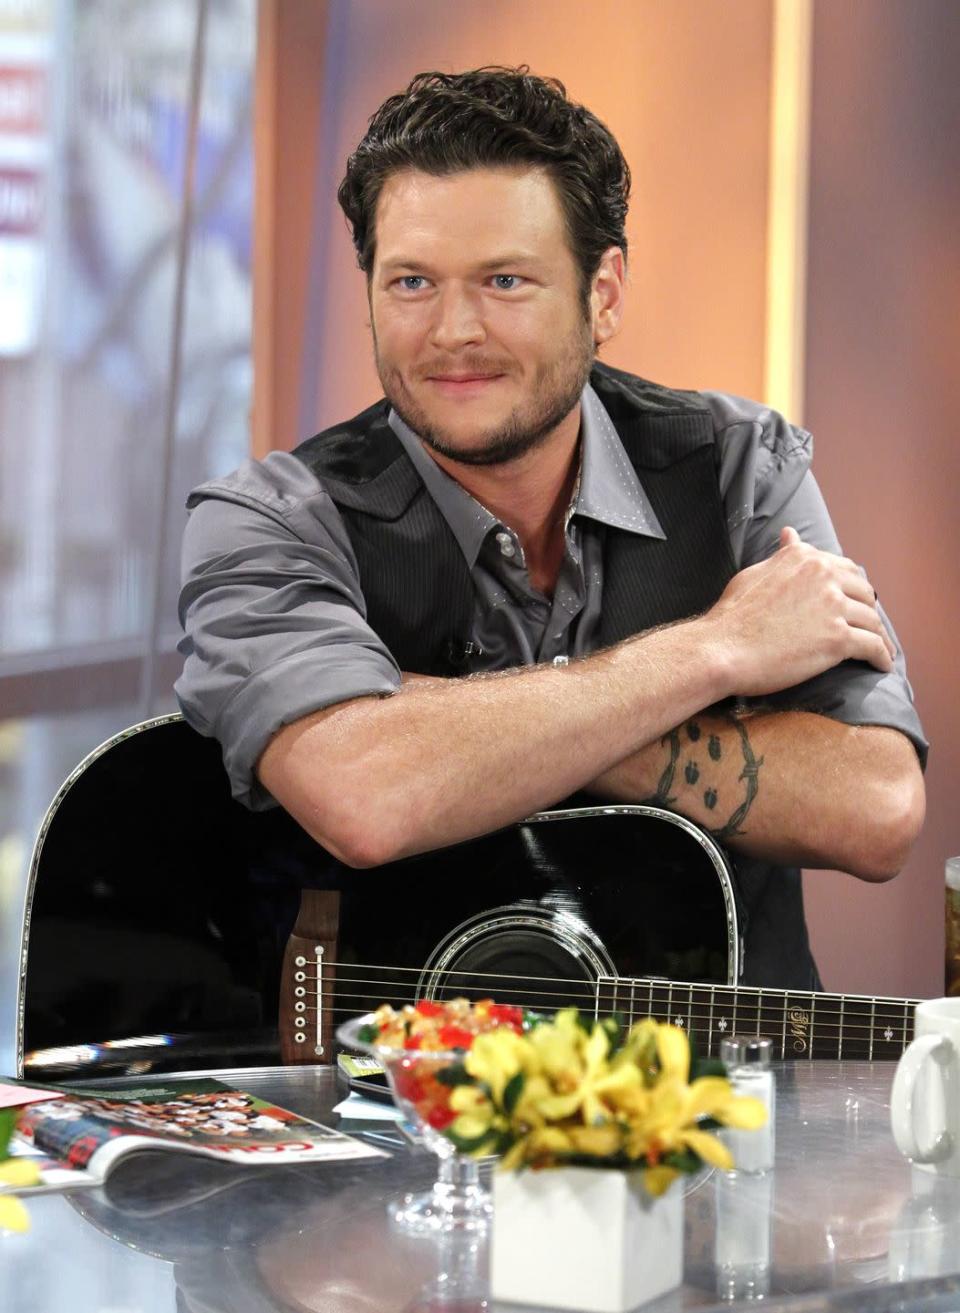 <p>One of Blake Shelton's tattoos is barbed wire around deer tracks. In an interview, he <a href="https://www.cheatsheet.com/entertainment/blake-shelton-said-he-has-the-crappiest-tattoo-and-fans-get-it-wrong.html/" rel="nofollow noopener" target="_blank" data-ylk="slk:explained" class="link rapid-noclick-resp">explained</a>, "This is what I drew him for a deer track. To this moment, people still come up to me and say, 'Man, ladybugs … that’s cool. What does that mean to you?' I probably have the crappiest tattoo - not only in country music - but maybe the world." </p>